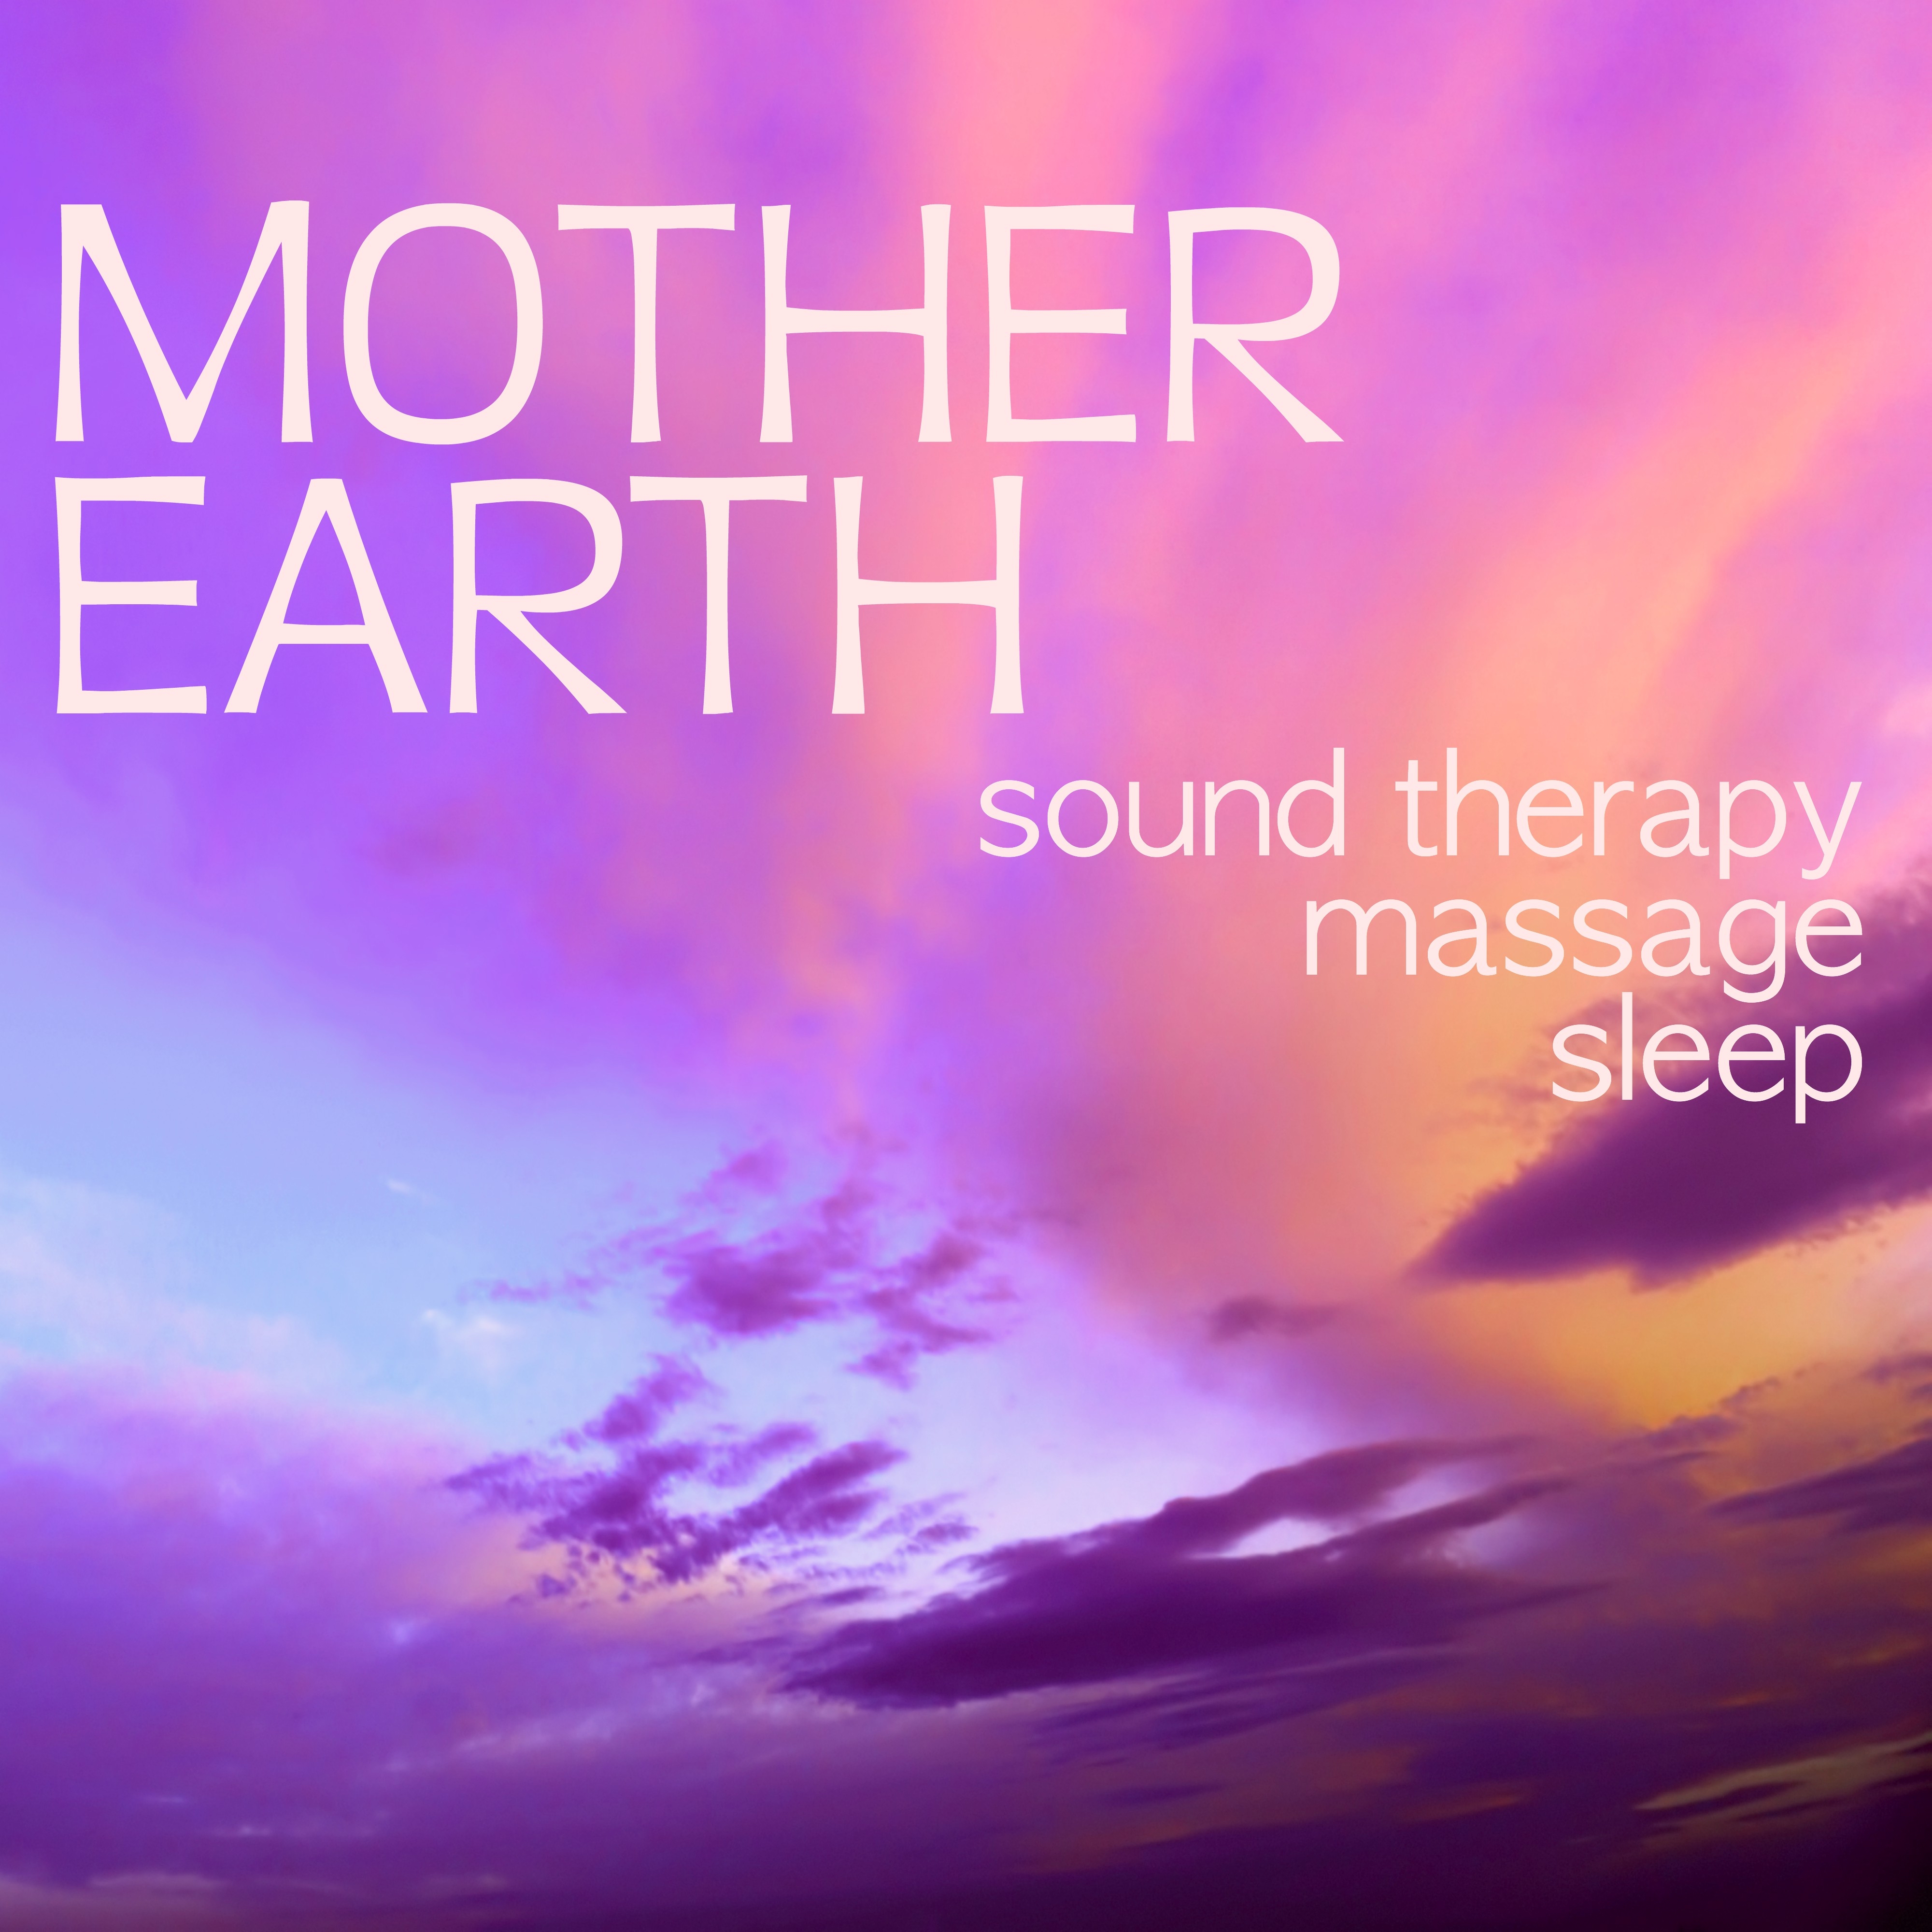 Mother Earth - Water Effect, Soothing Music Water Sounds and Sound Effects for Sound Therapy, Massage, Sleep Essential Spa Relaxation Meditation, Healing Yoga